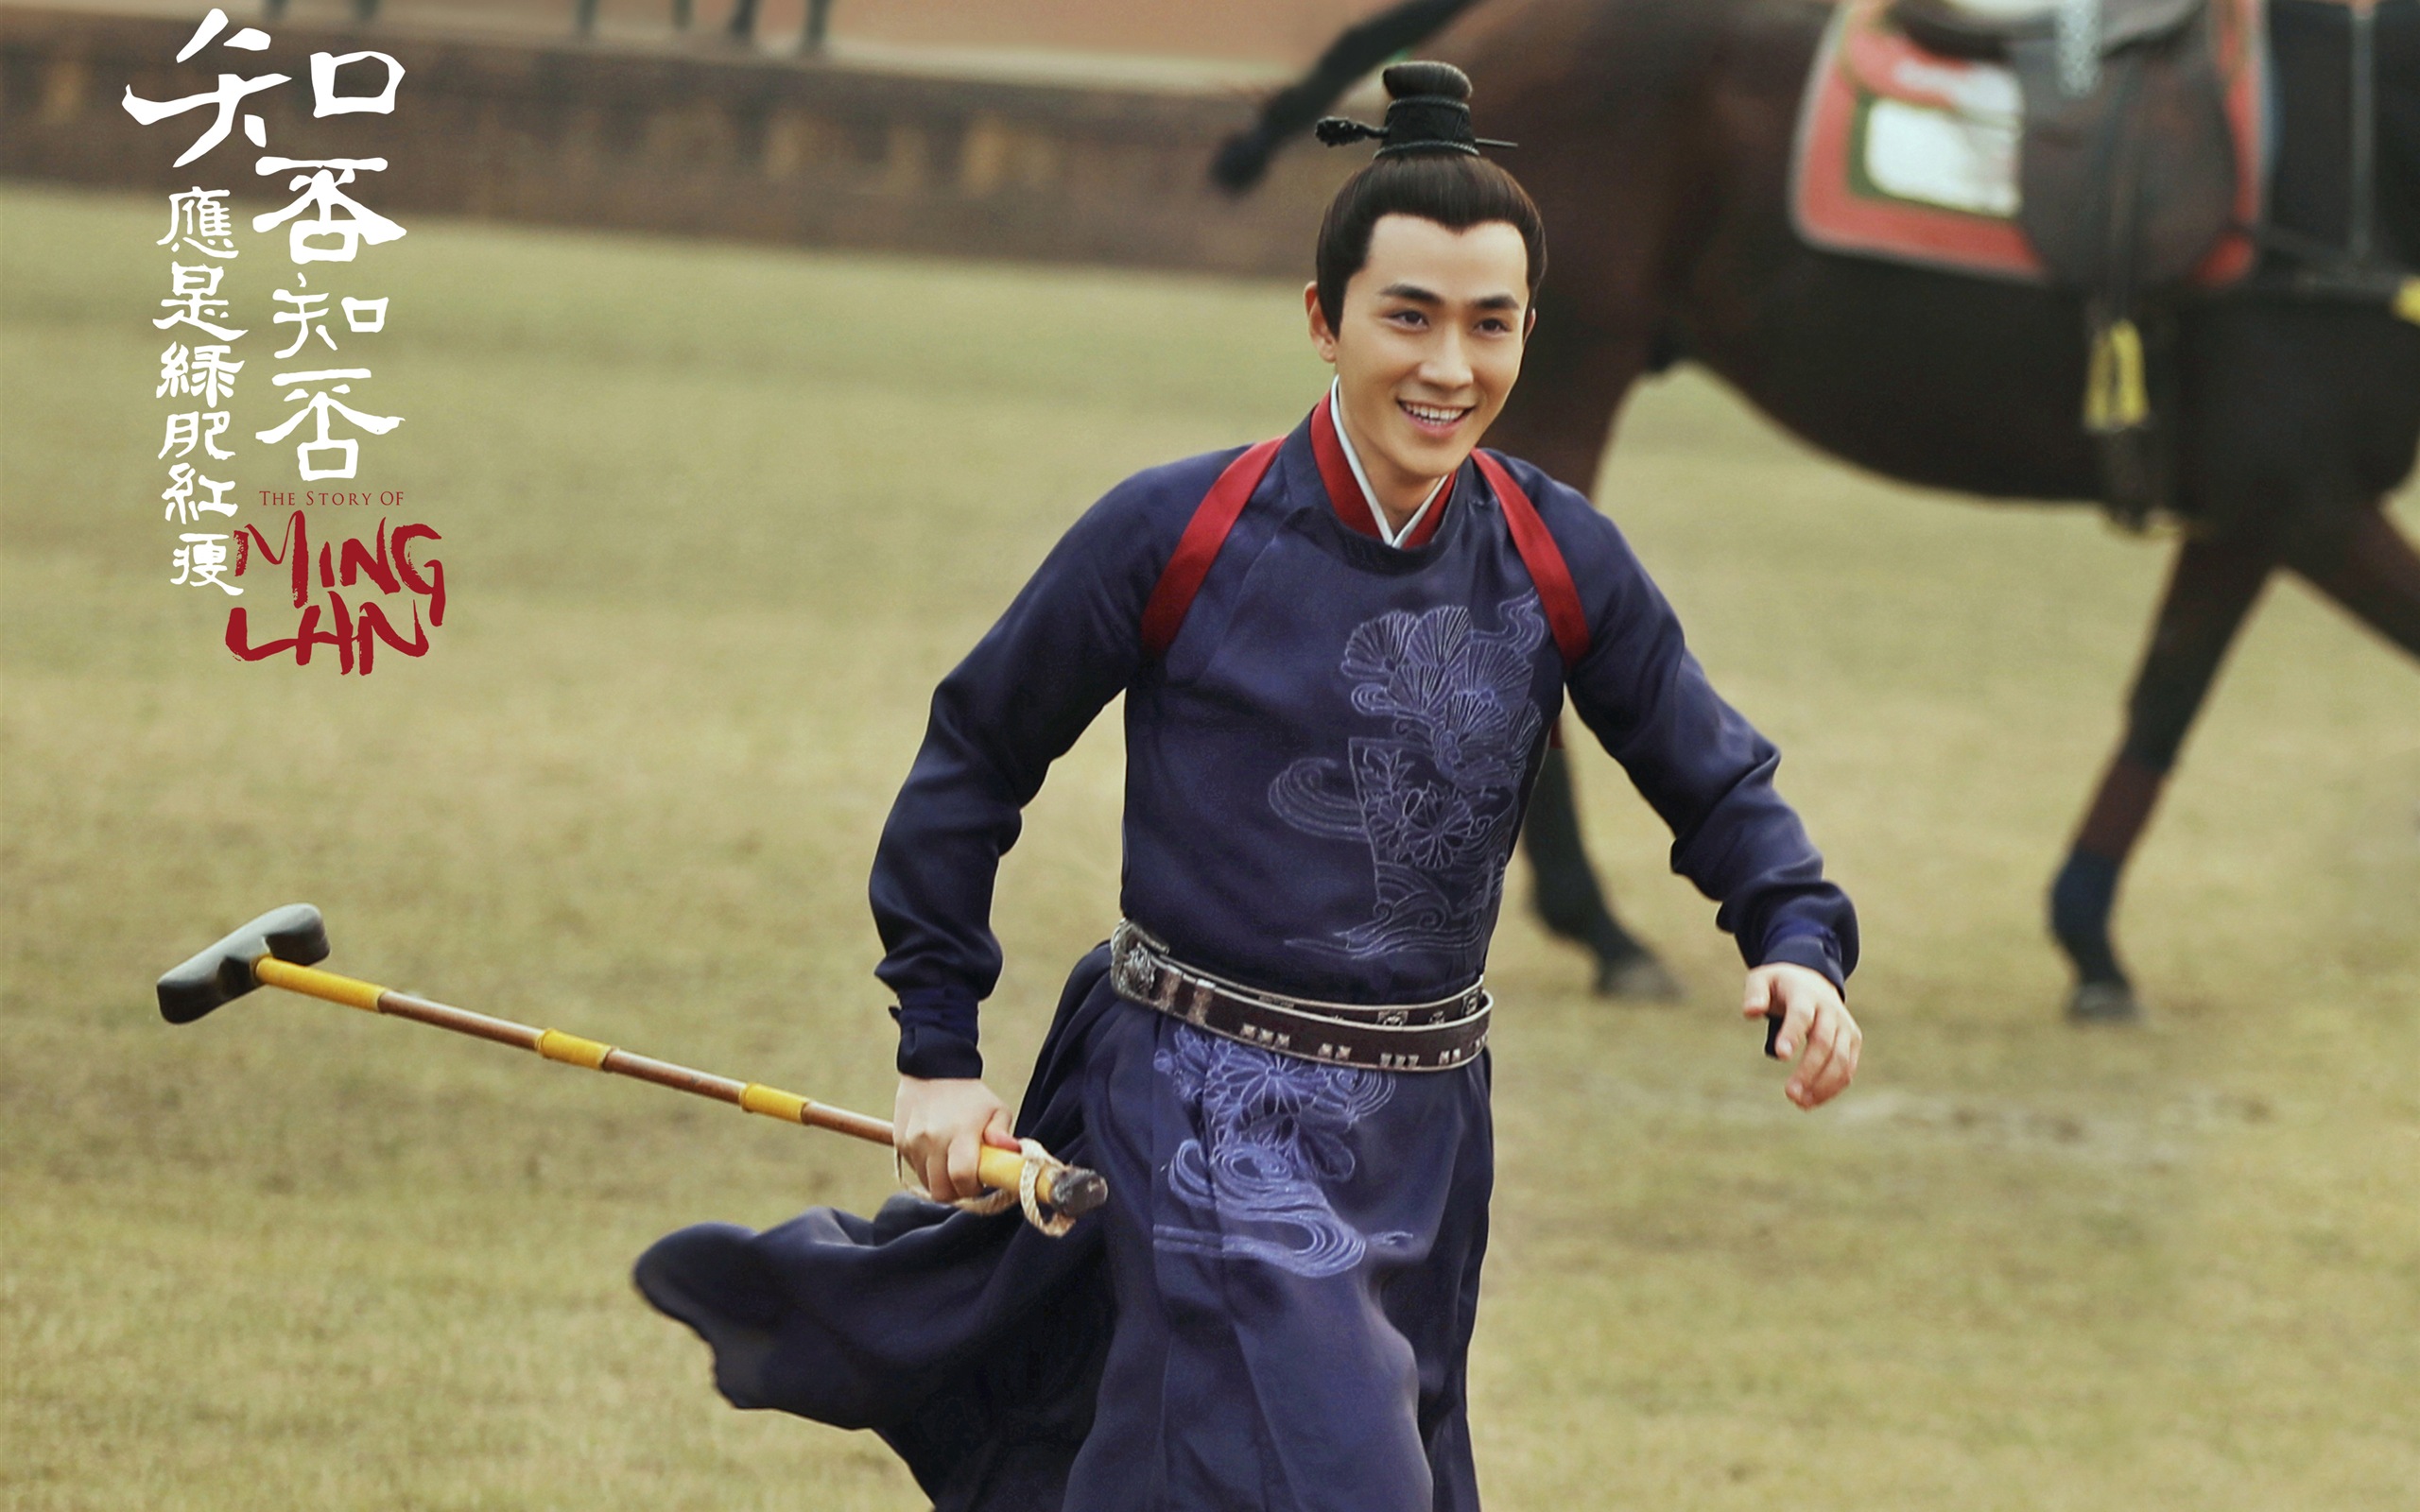 The Story Of MingLan, TV series HD wallpapers #25 - 2560x1600